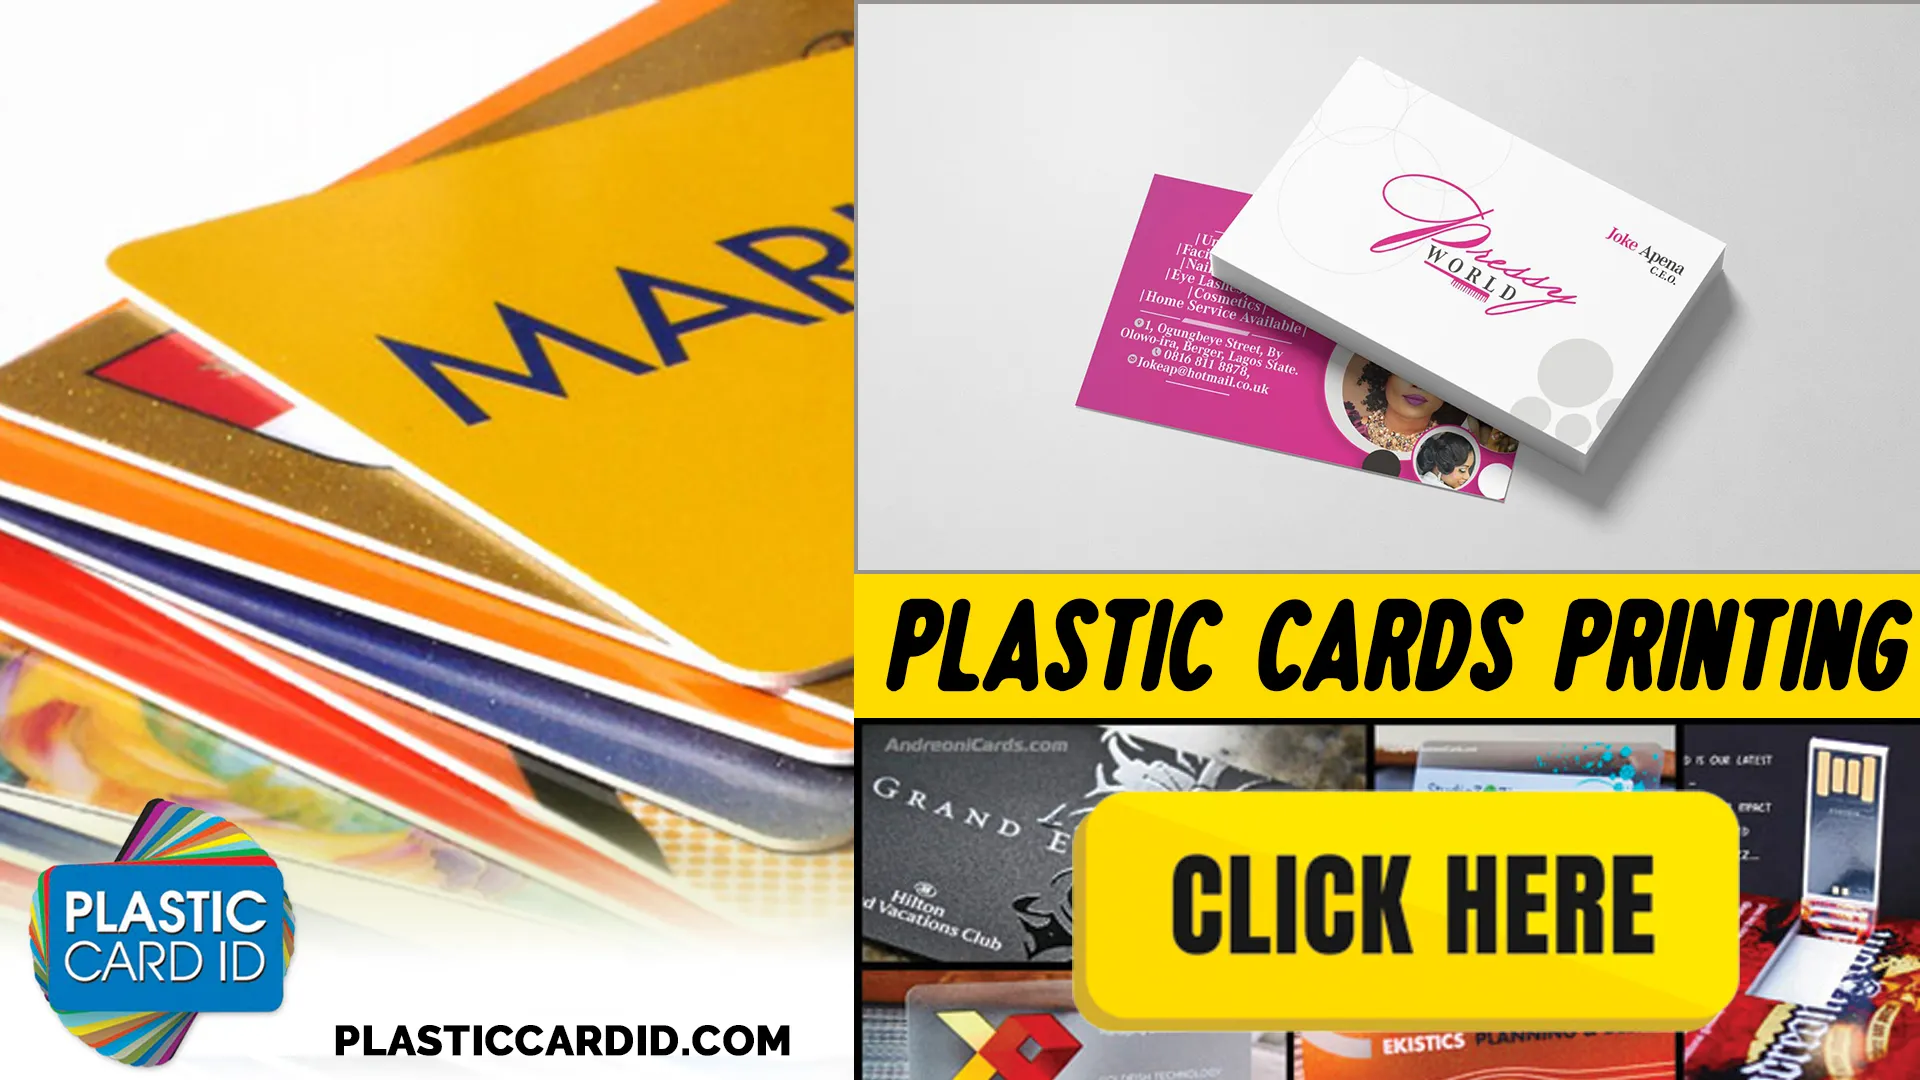 Welcome to Plastic Card ID




: Where Customer Feedback Shapes Excellence in Card Services